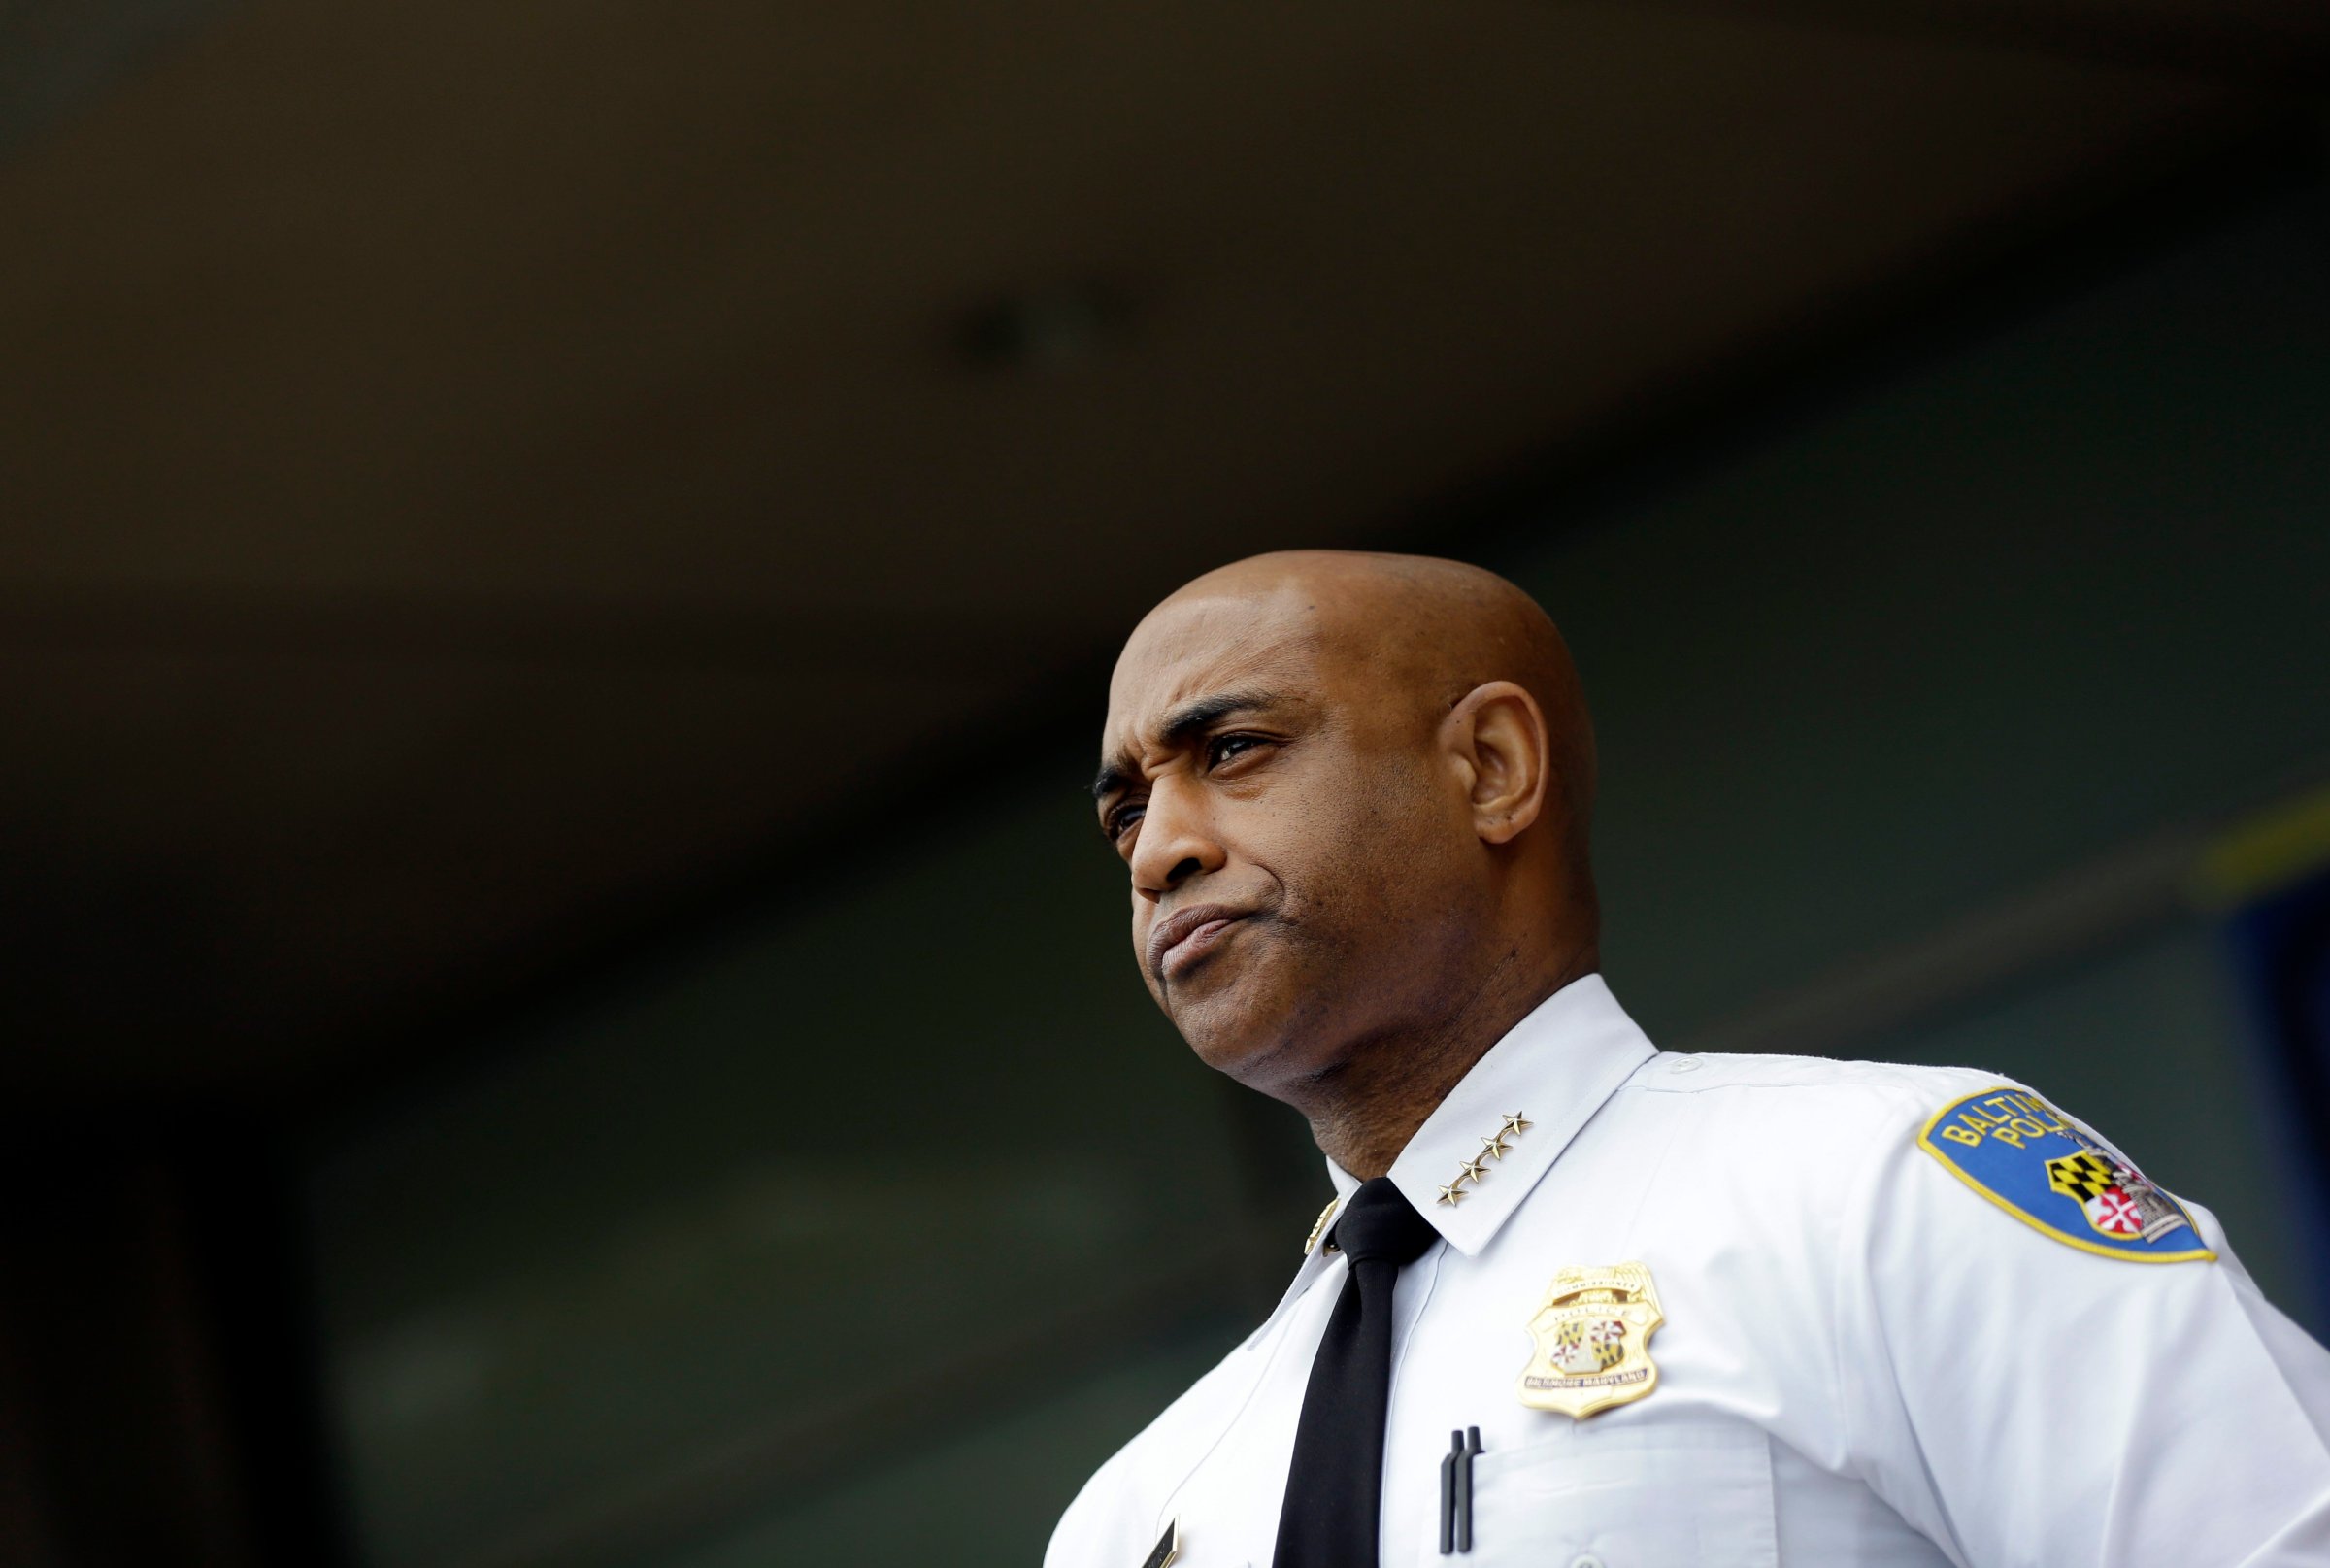 Baltimore Police Department Commissioner Anthony Batts listens as Deputy Commissioner Kevin Davis speaks at a news conference, in Baltimore on April 30, 2015.